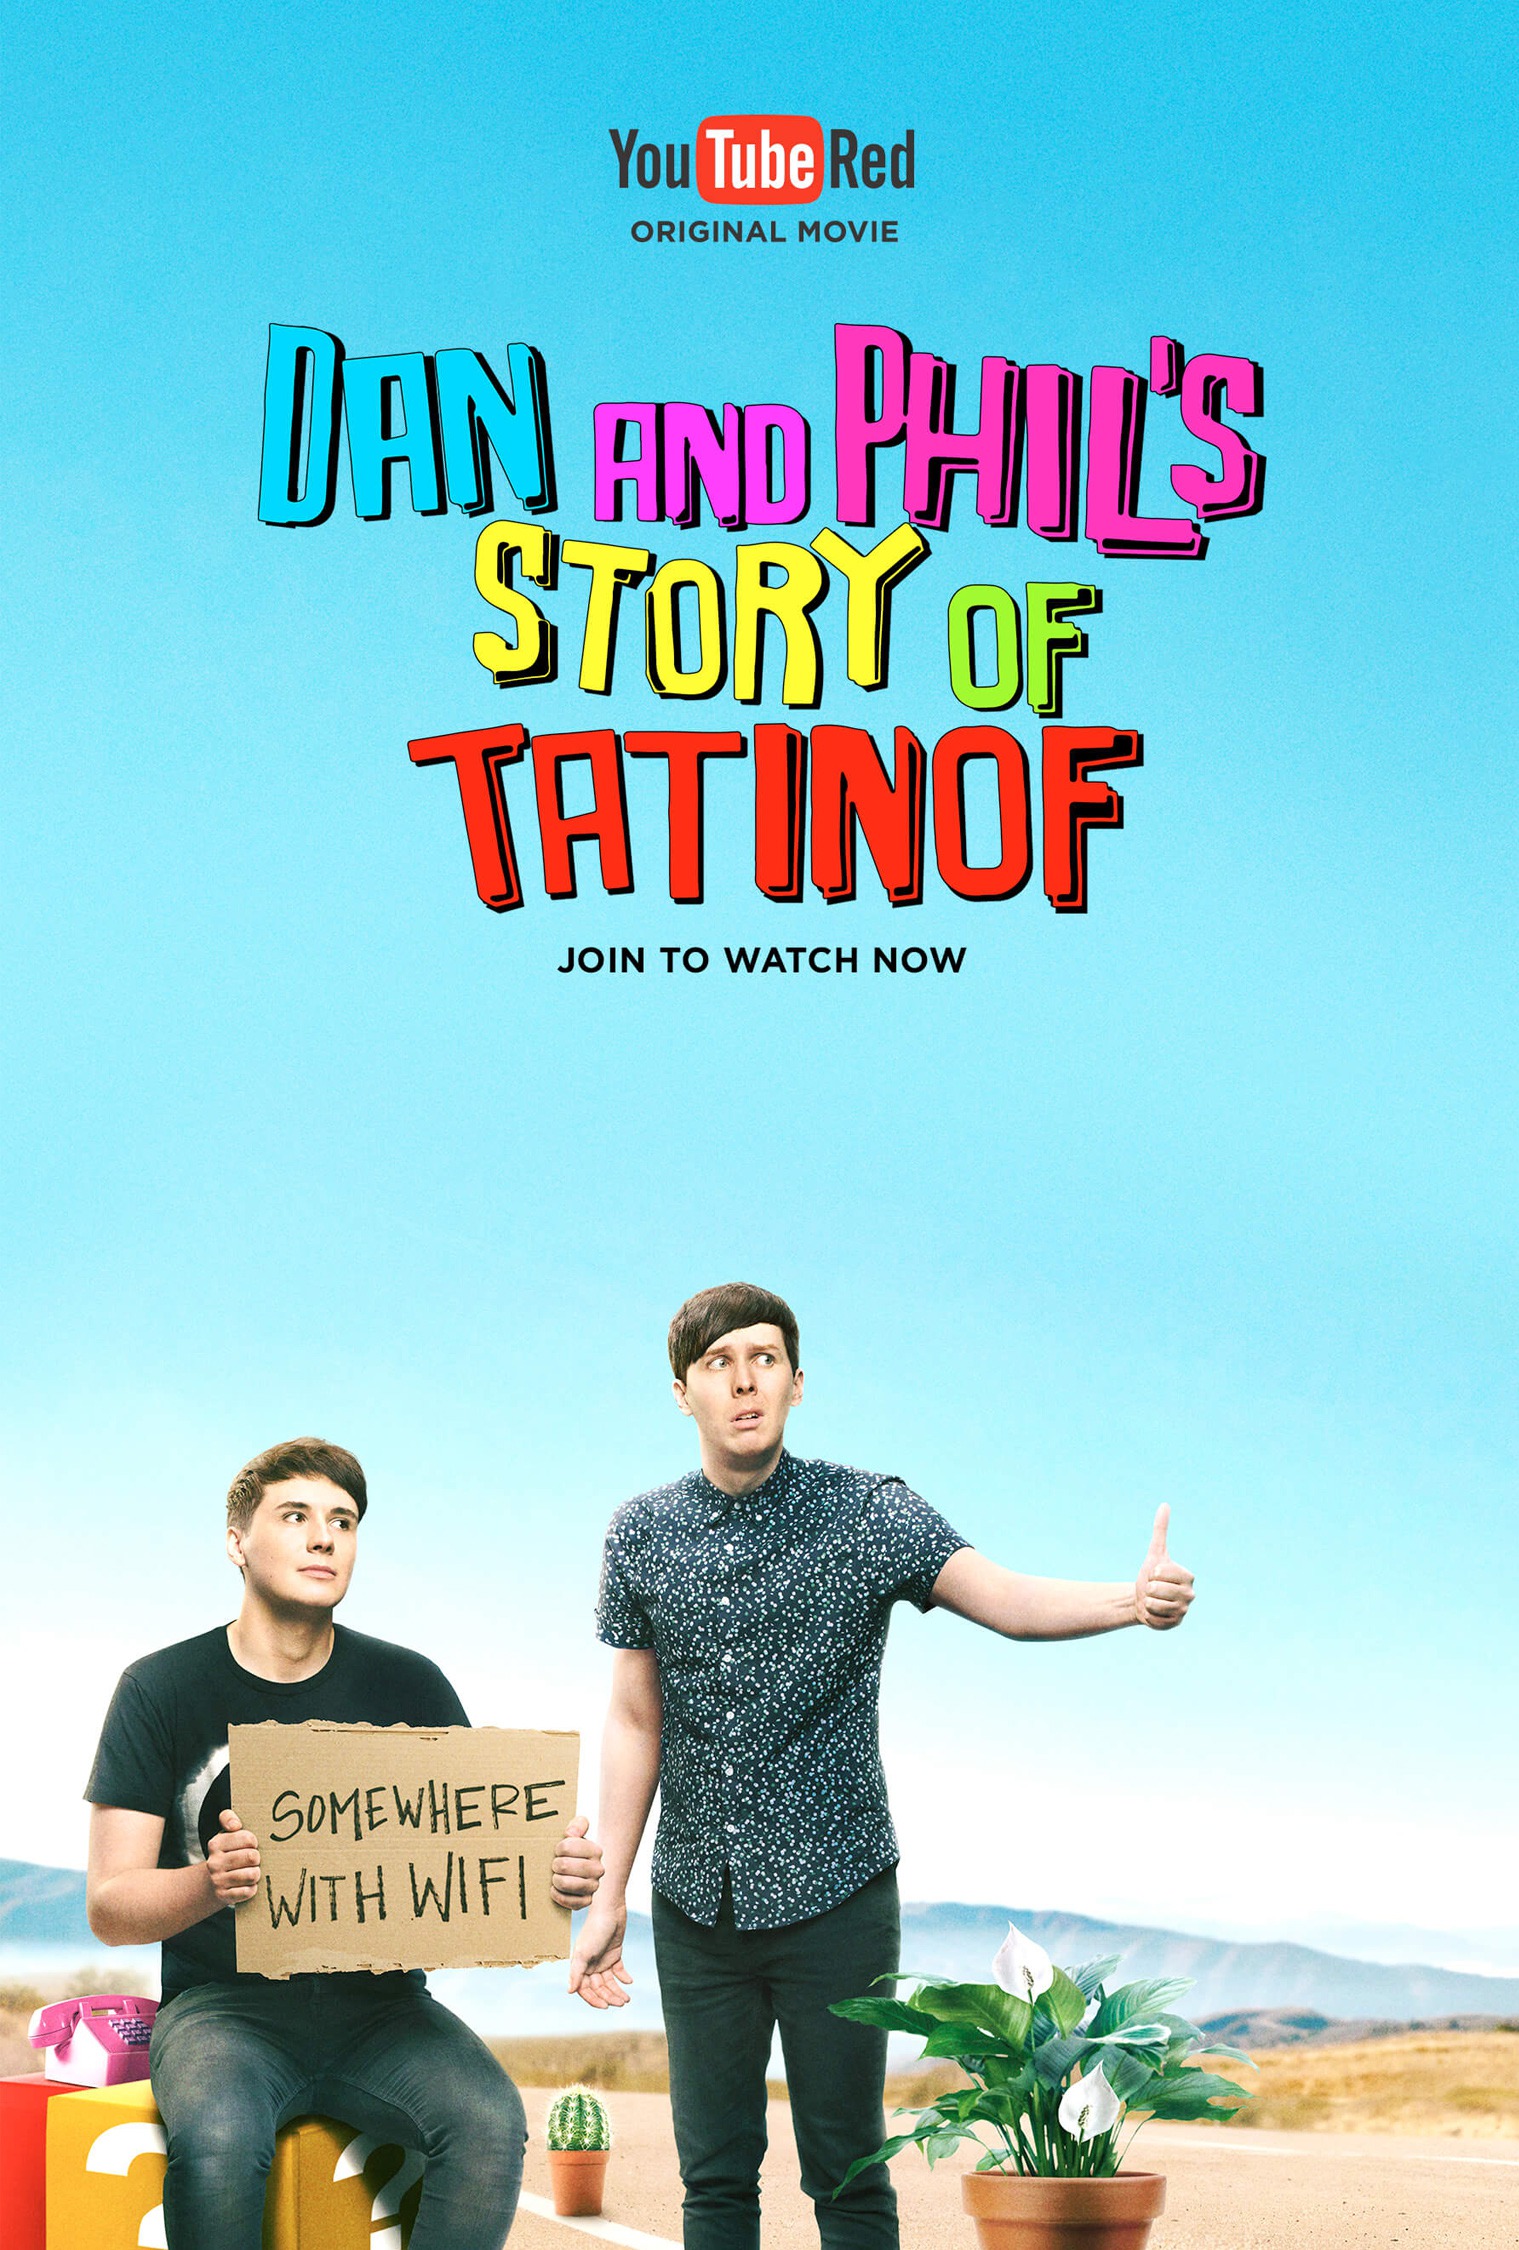 Mega Sized TV Poster Image for Dan and Phil's Story of TATINOF (#1 of 2)